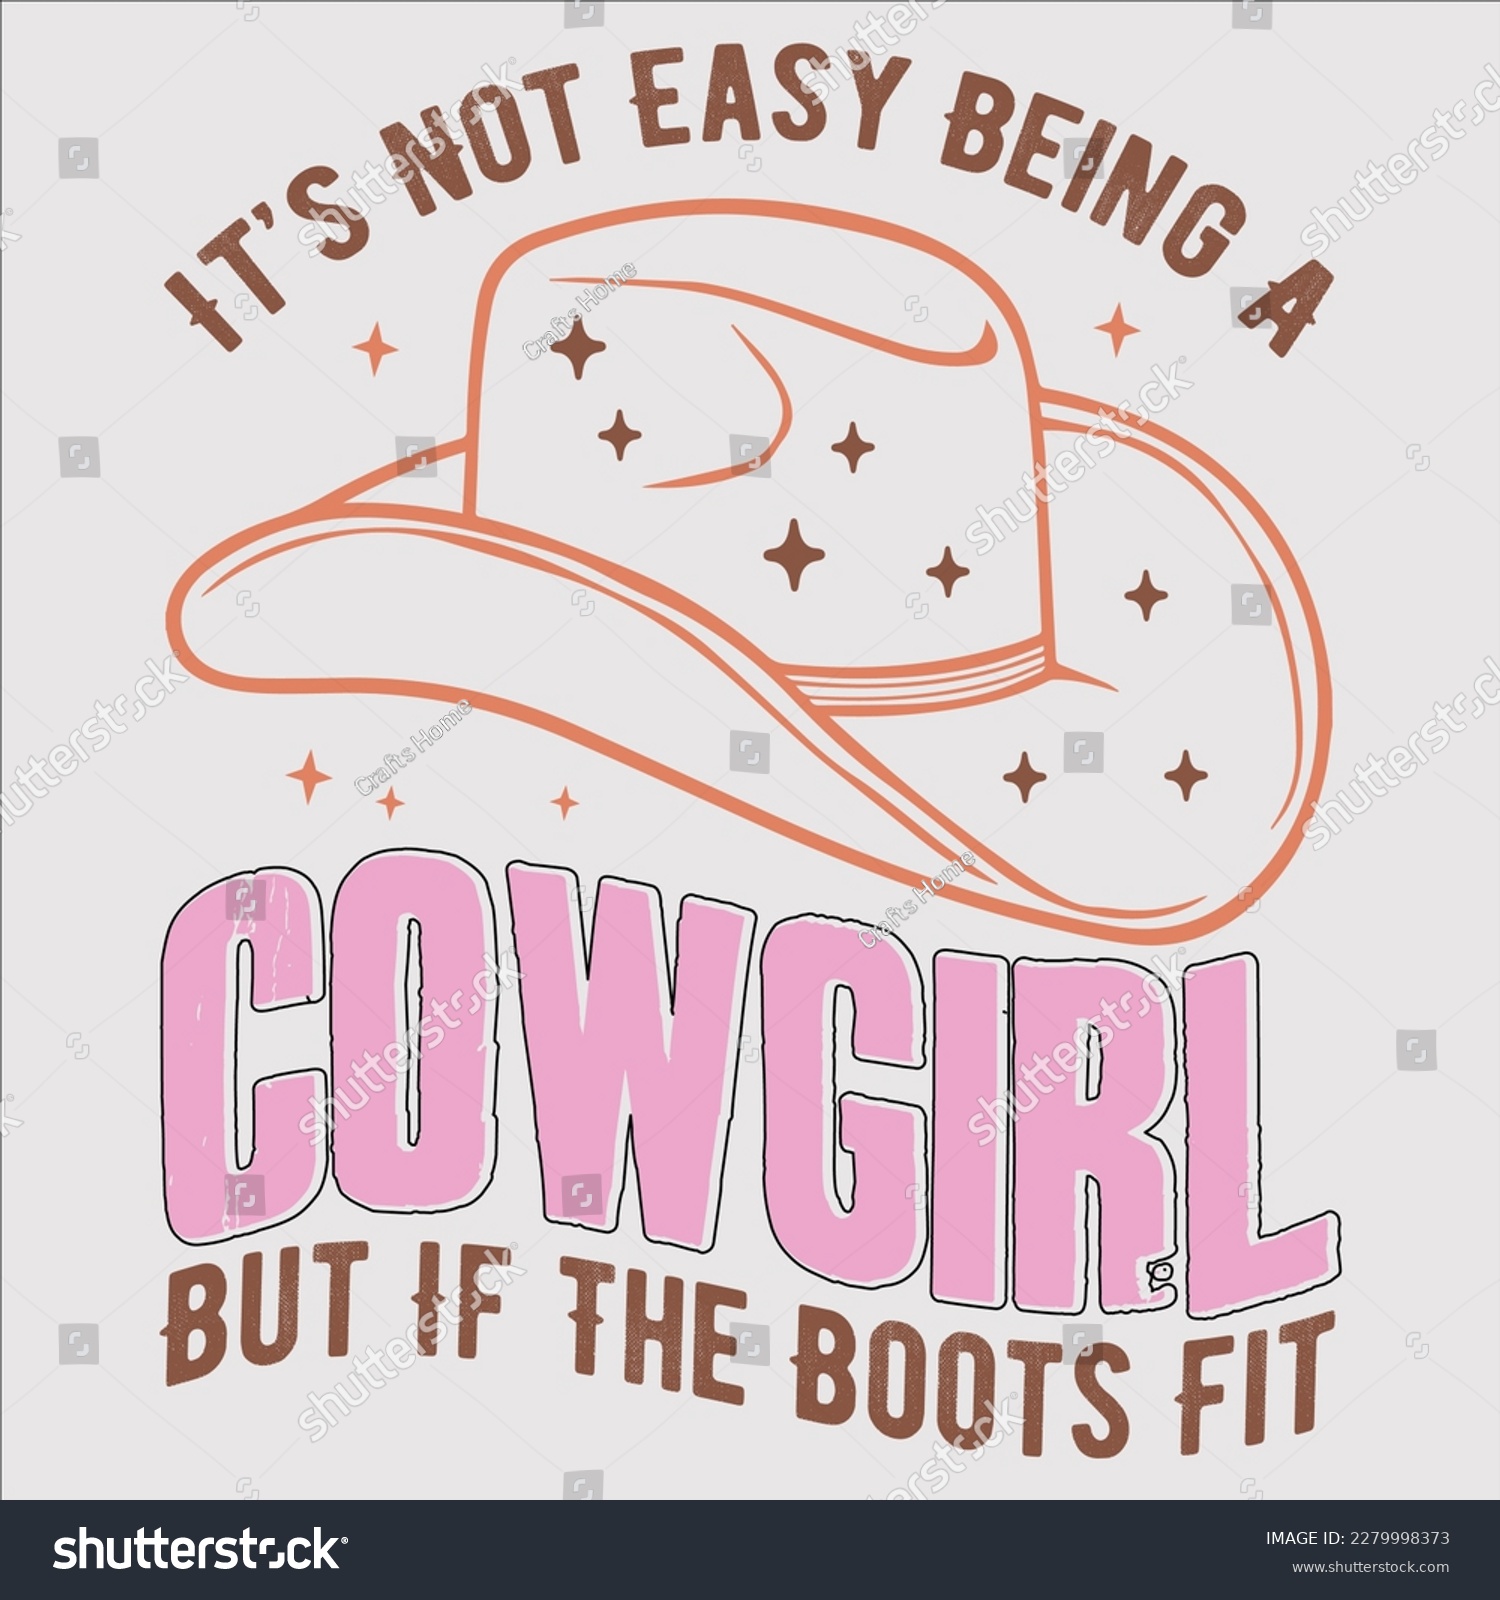 SVG of It’s Not Easy Being A Cowgirl But If The Boots Fit, cowboy, cowgirl, western, texas, country, cowboy hat, hey, funny, cowboy boots, howdy, svg